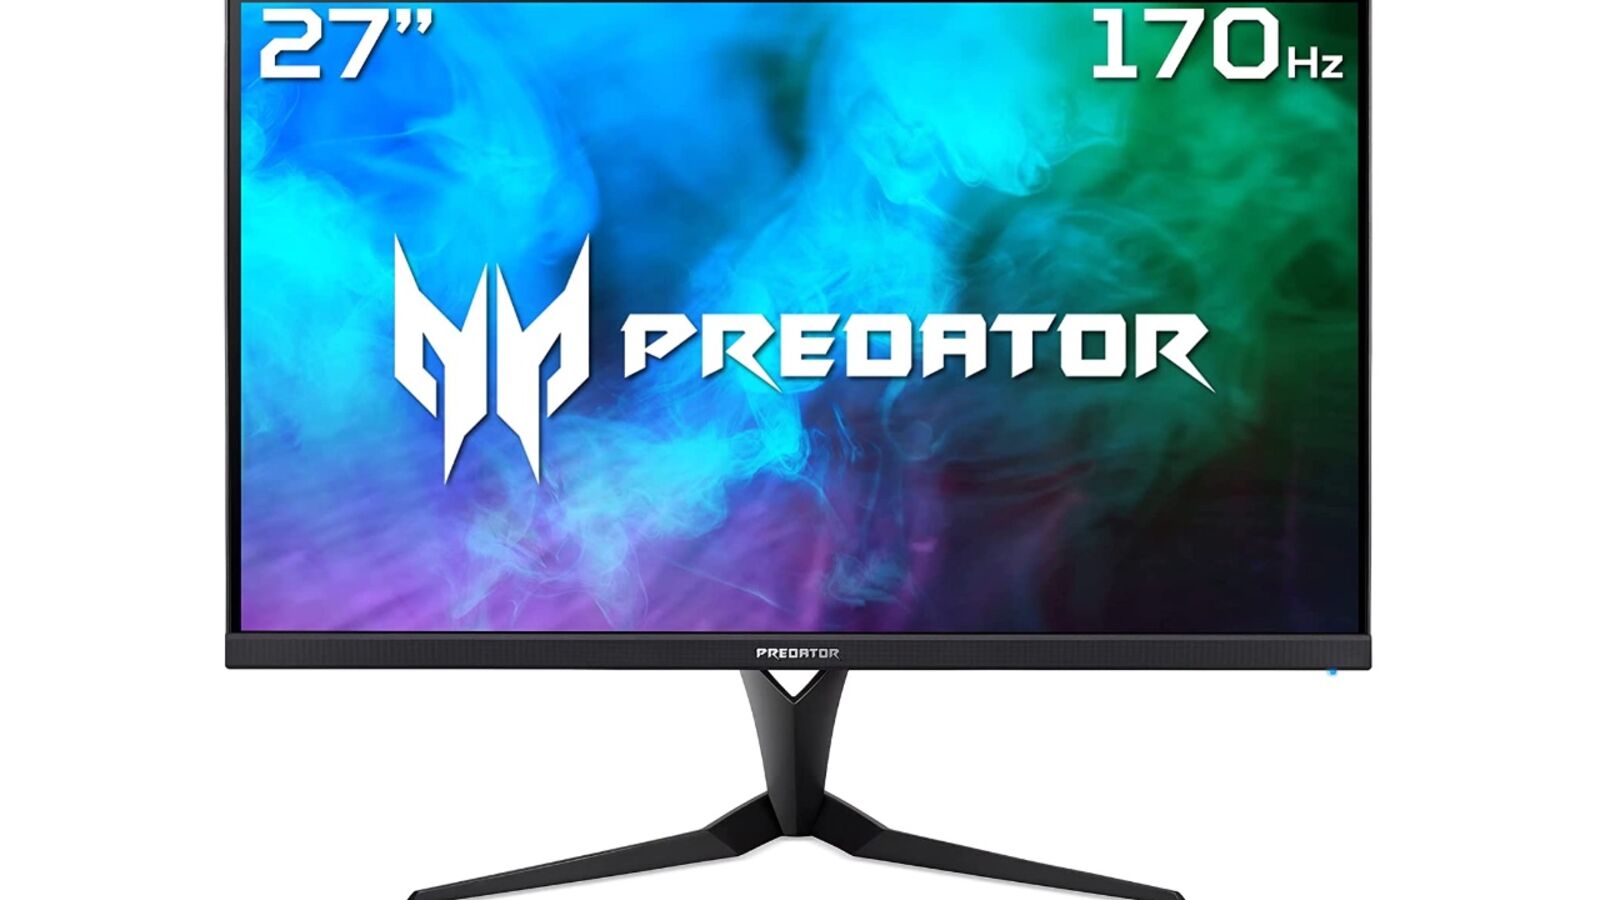 Save £70 on this Acer Predator monitor with a 240Hz refresh rate